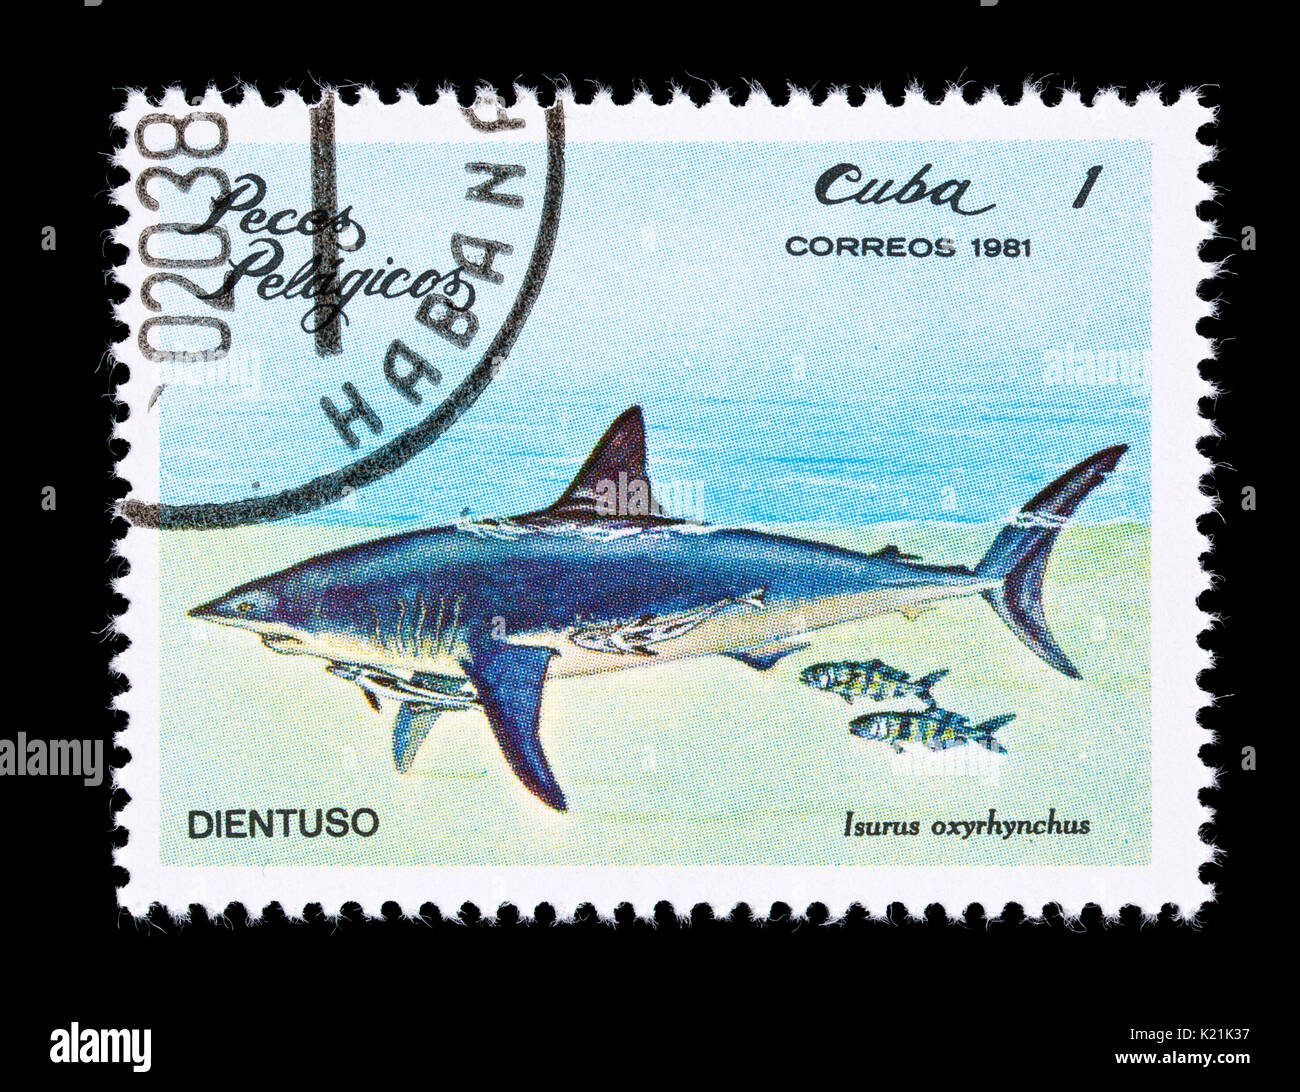 Postage stamp from Cuba depicting a (Isurus oxyrhynchus) Stock Photo